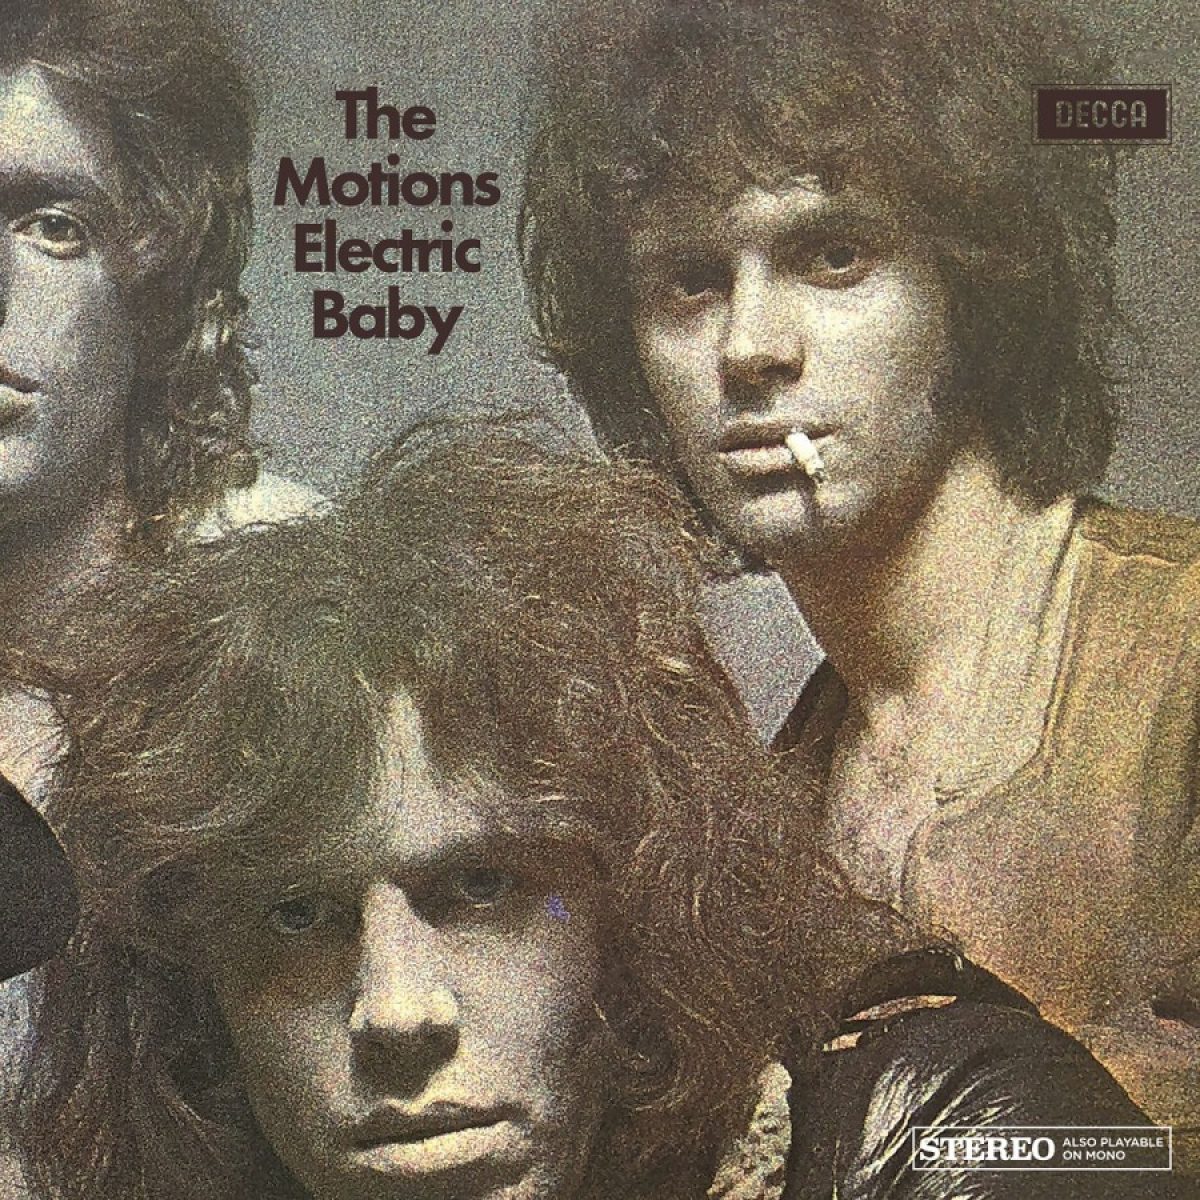 The Motions, Electric baby